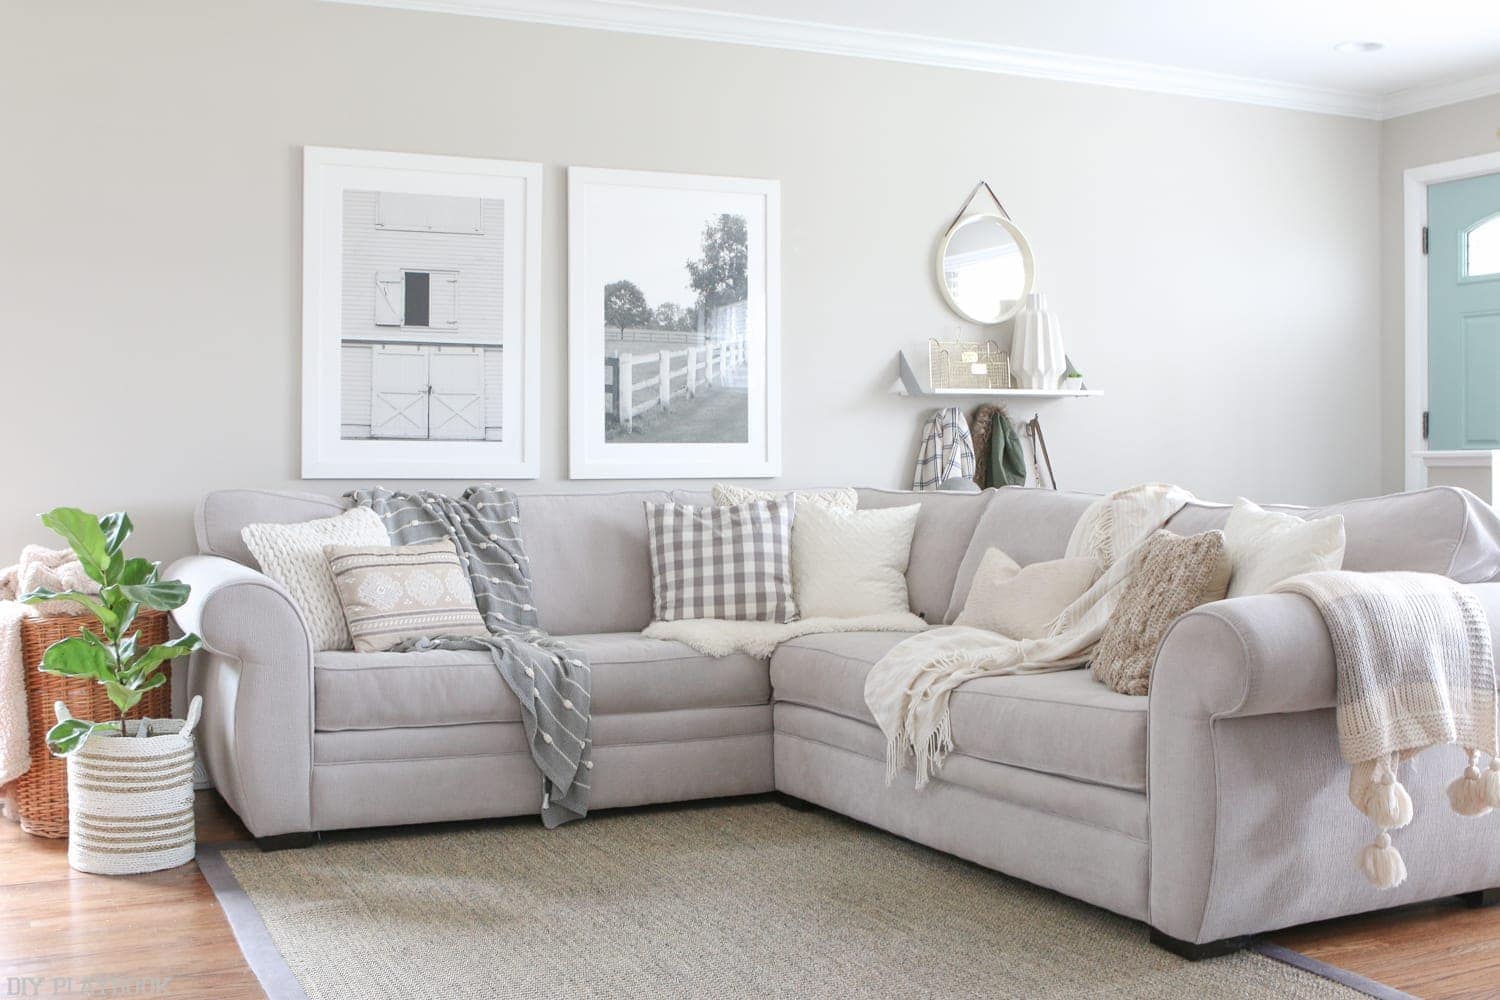 This color palate warms up the couch and makes the room inviting